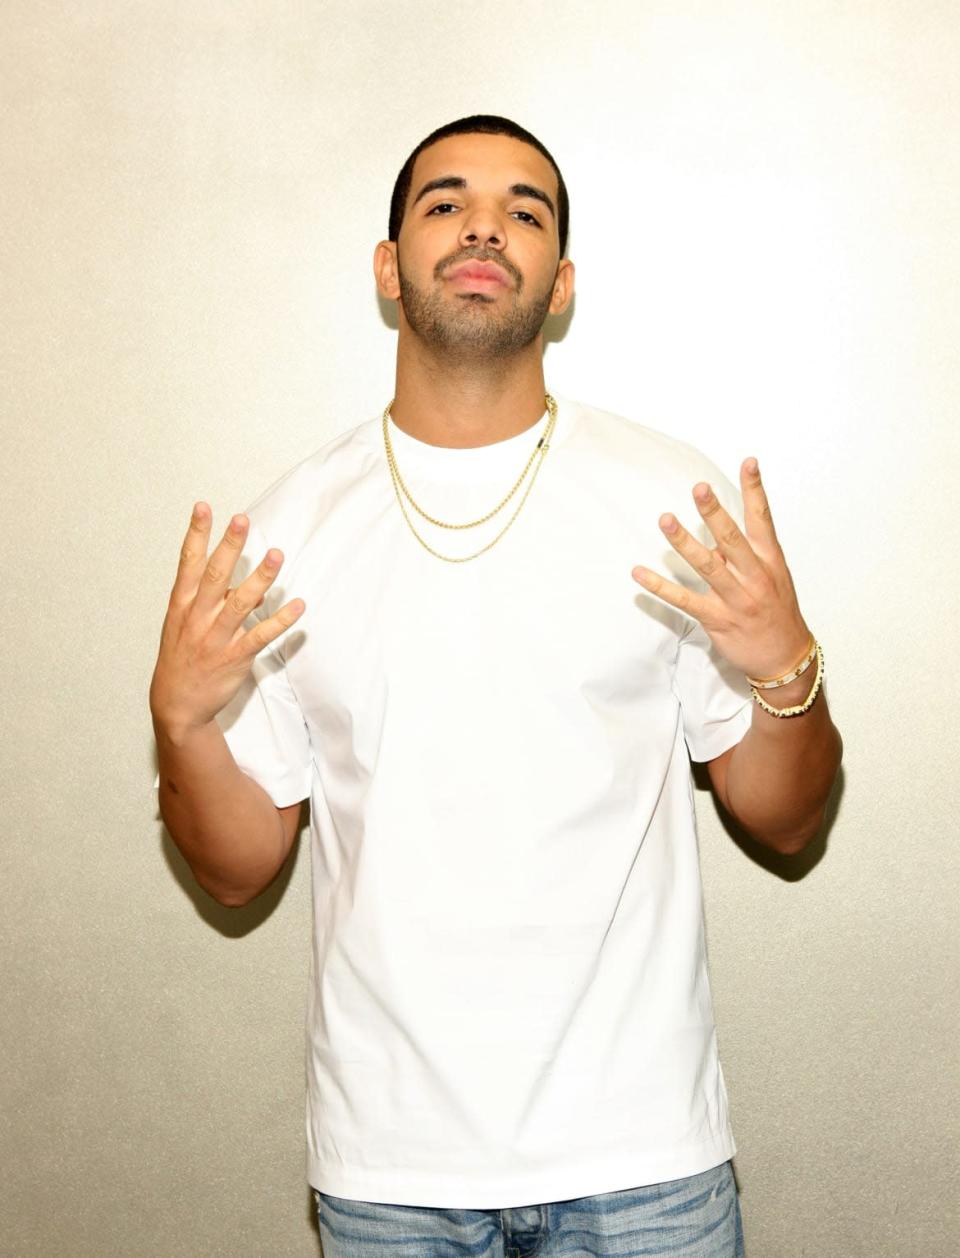 <div class="inline-image__caption"><p>Drake in 2013.</p></div> <div class="inline-image__credit">Bennett Raglin/BET/Getty</div>